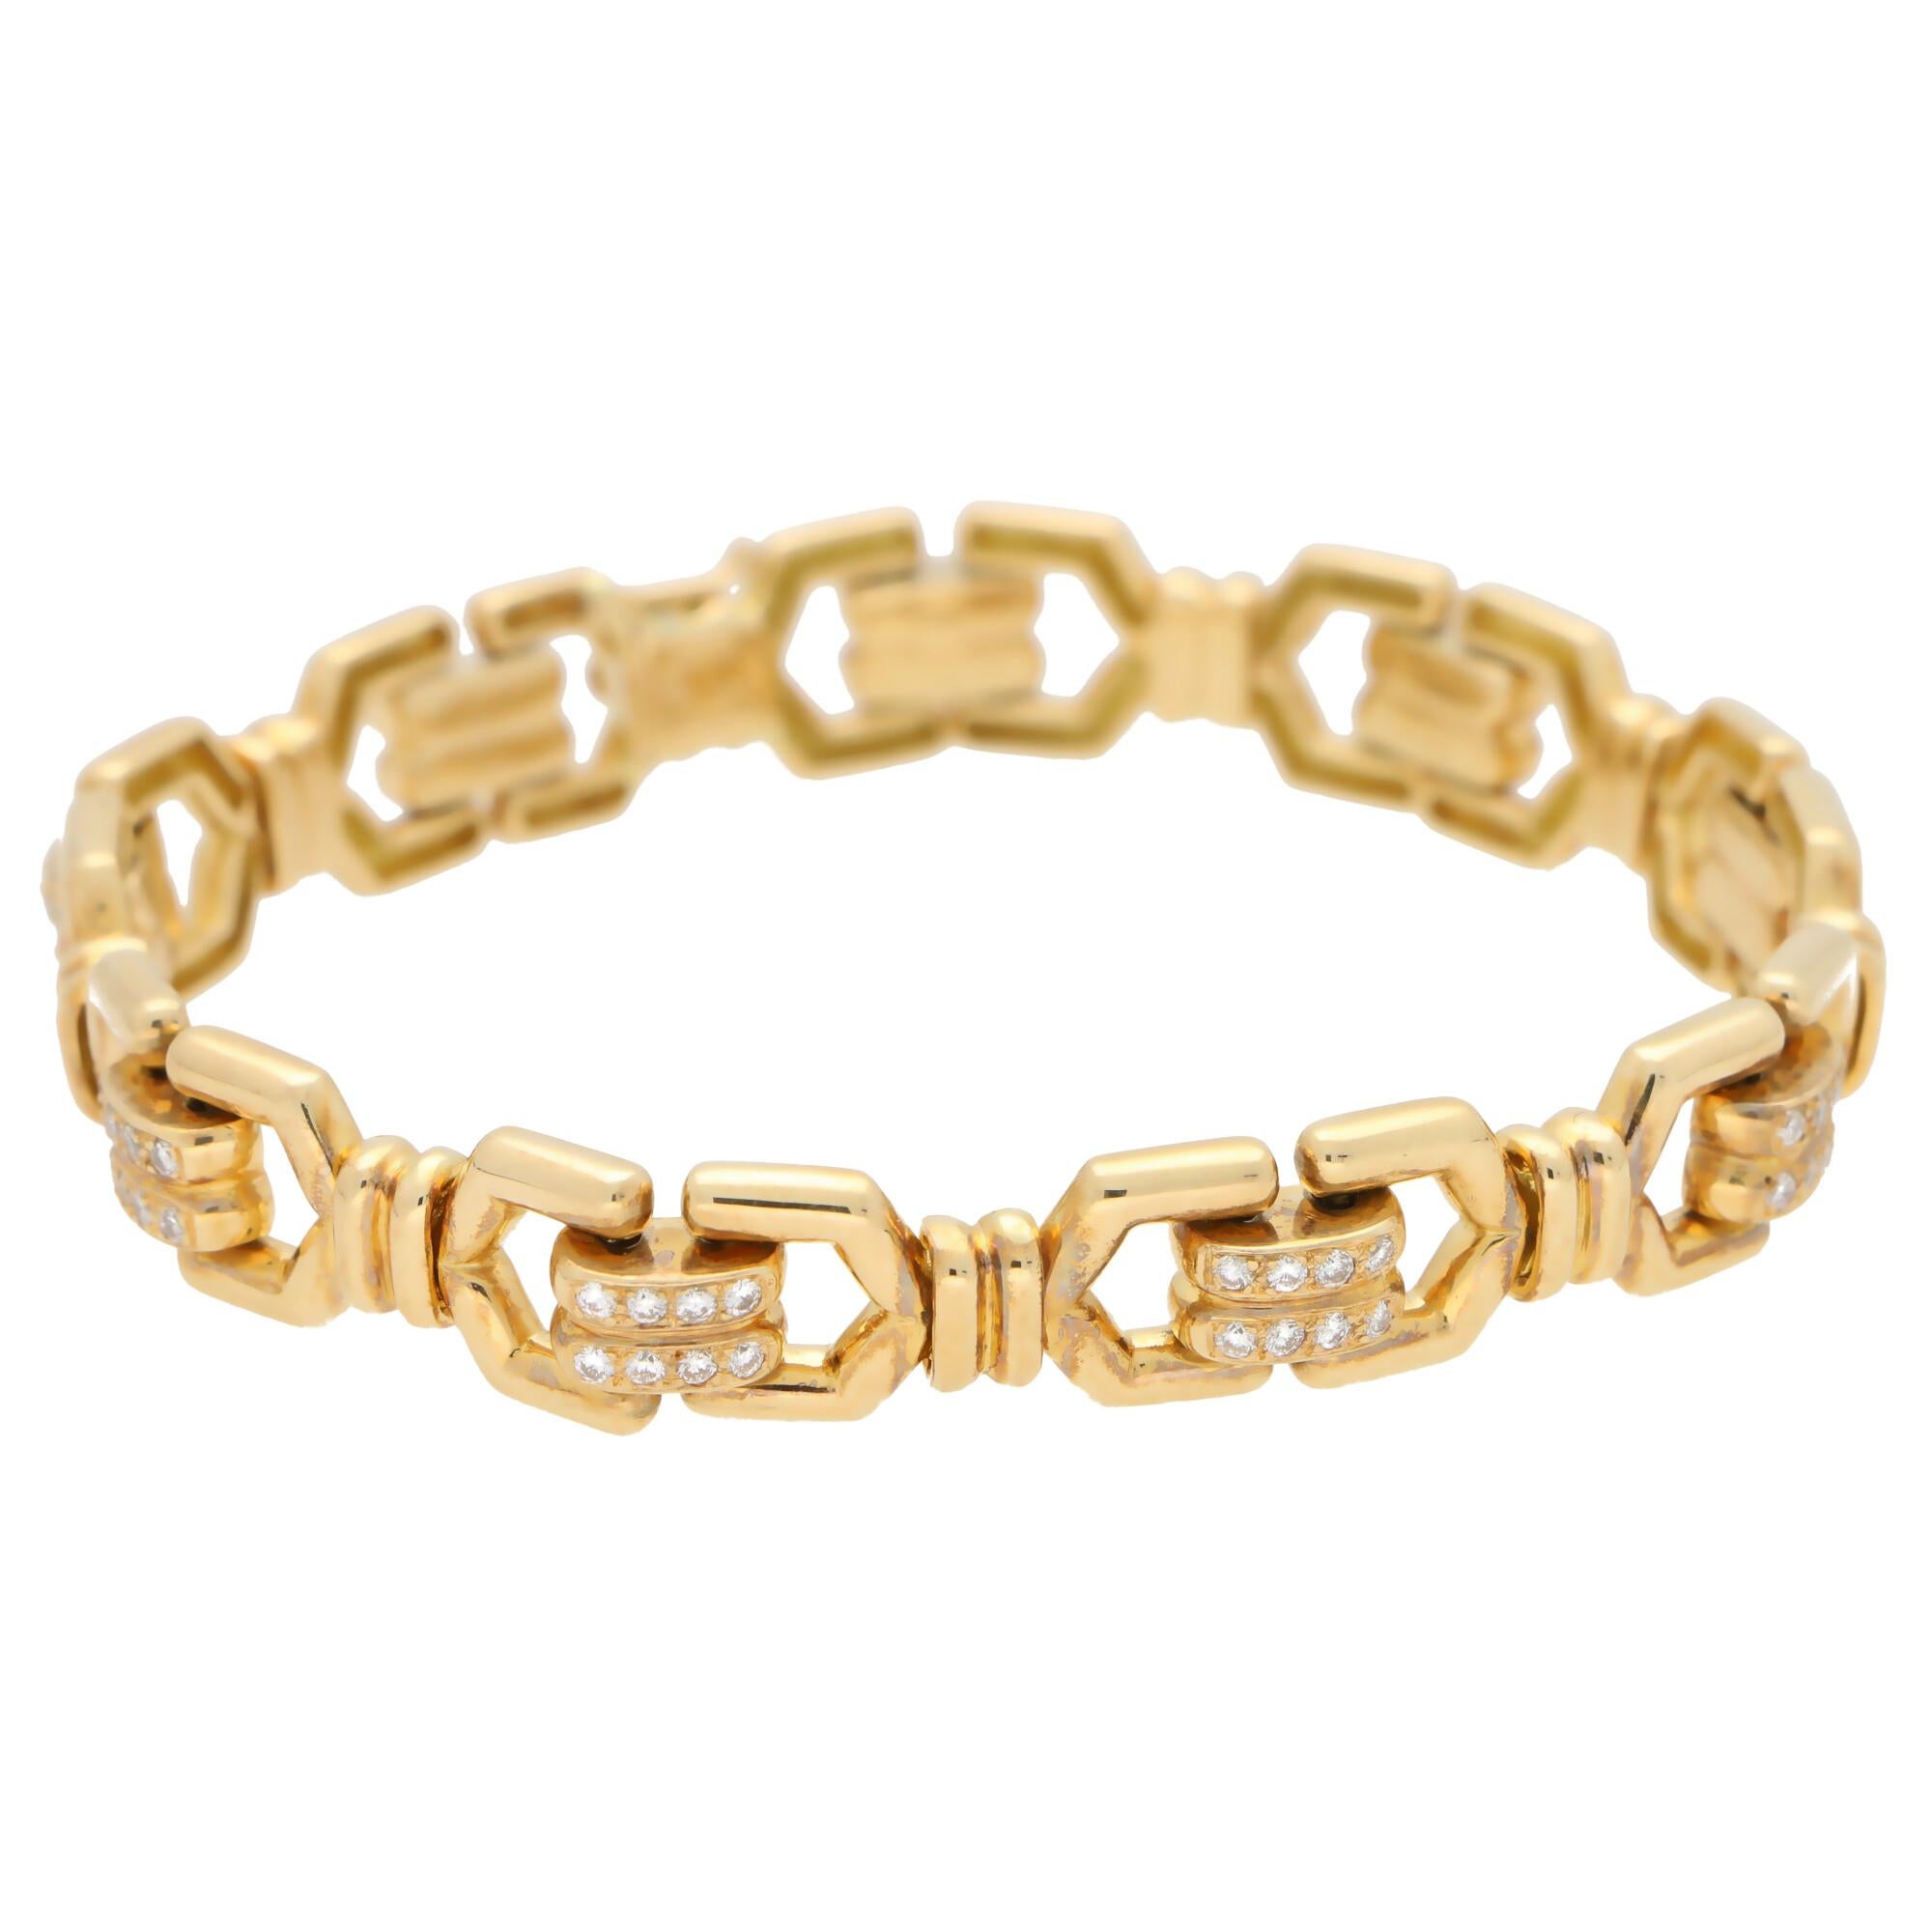 A lovely signed Mauboussin diamond chain link bracelet set in 18k yellow gold.

The bracelet is composed of nine beautifully crafted articulated links, all of which being centrally set with a pavé set diamond panel. 

Due to the links being